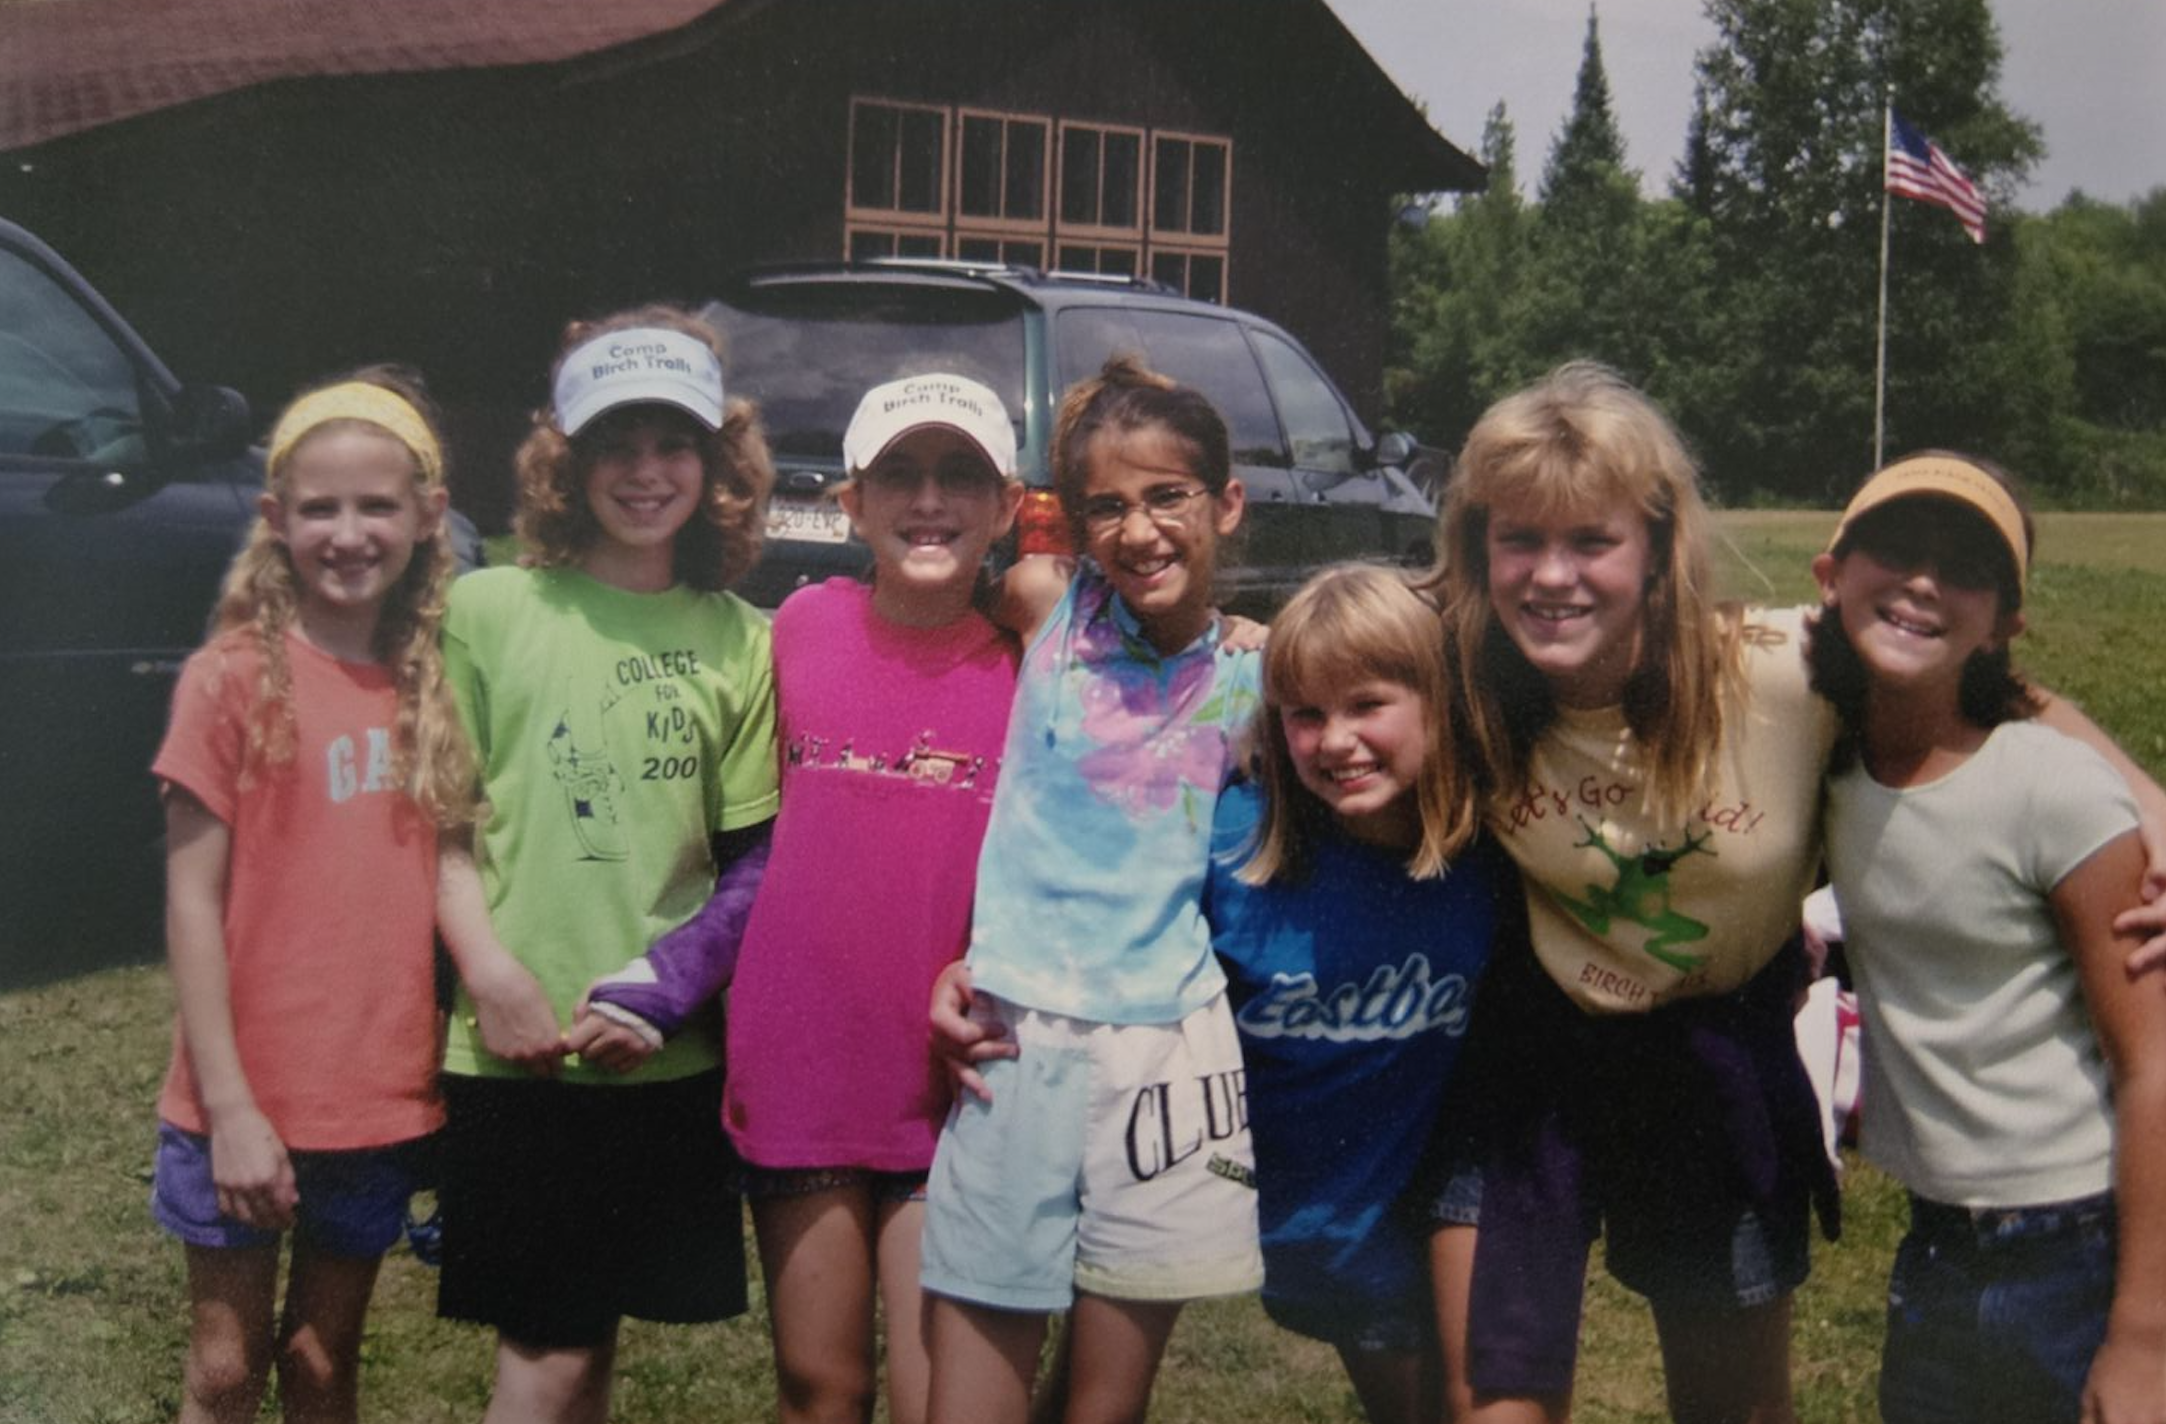 Emily (second from the left) and her Girl Scout troop at Camp Birch Trails in 2002.